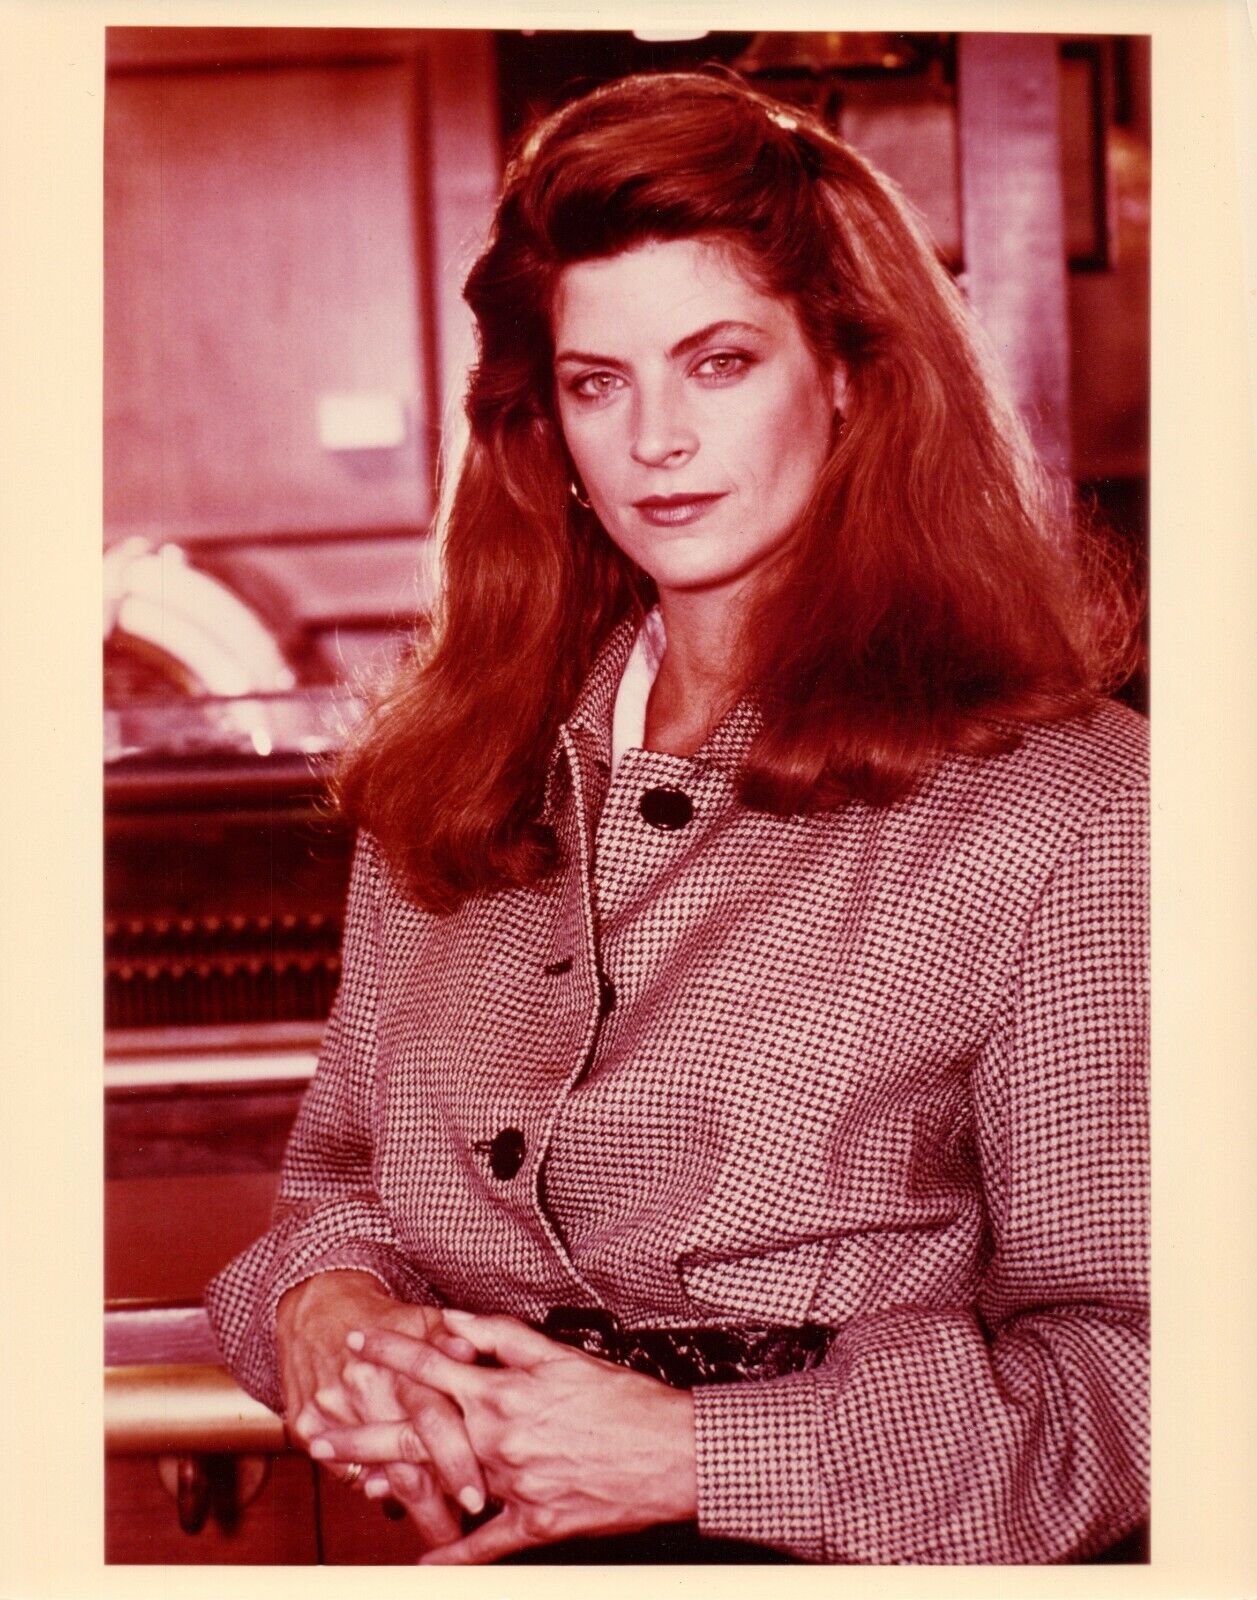 KIRSTIE ALLEY Actress Movie Promo Vintage Photo Poster painting 8x10